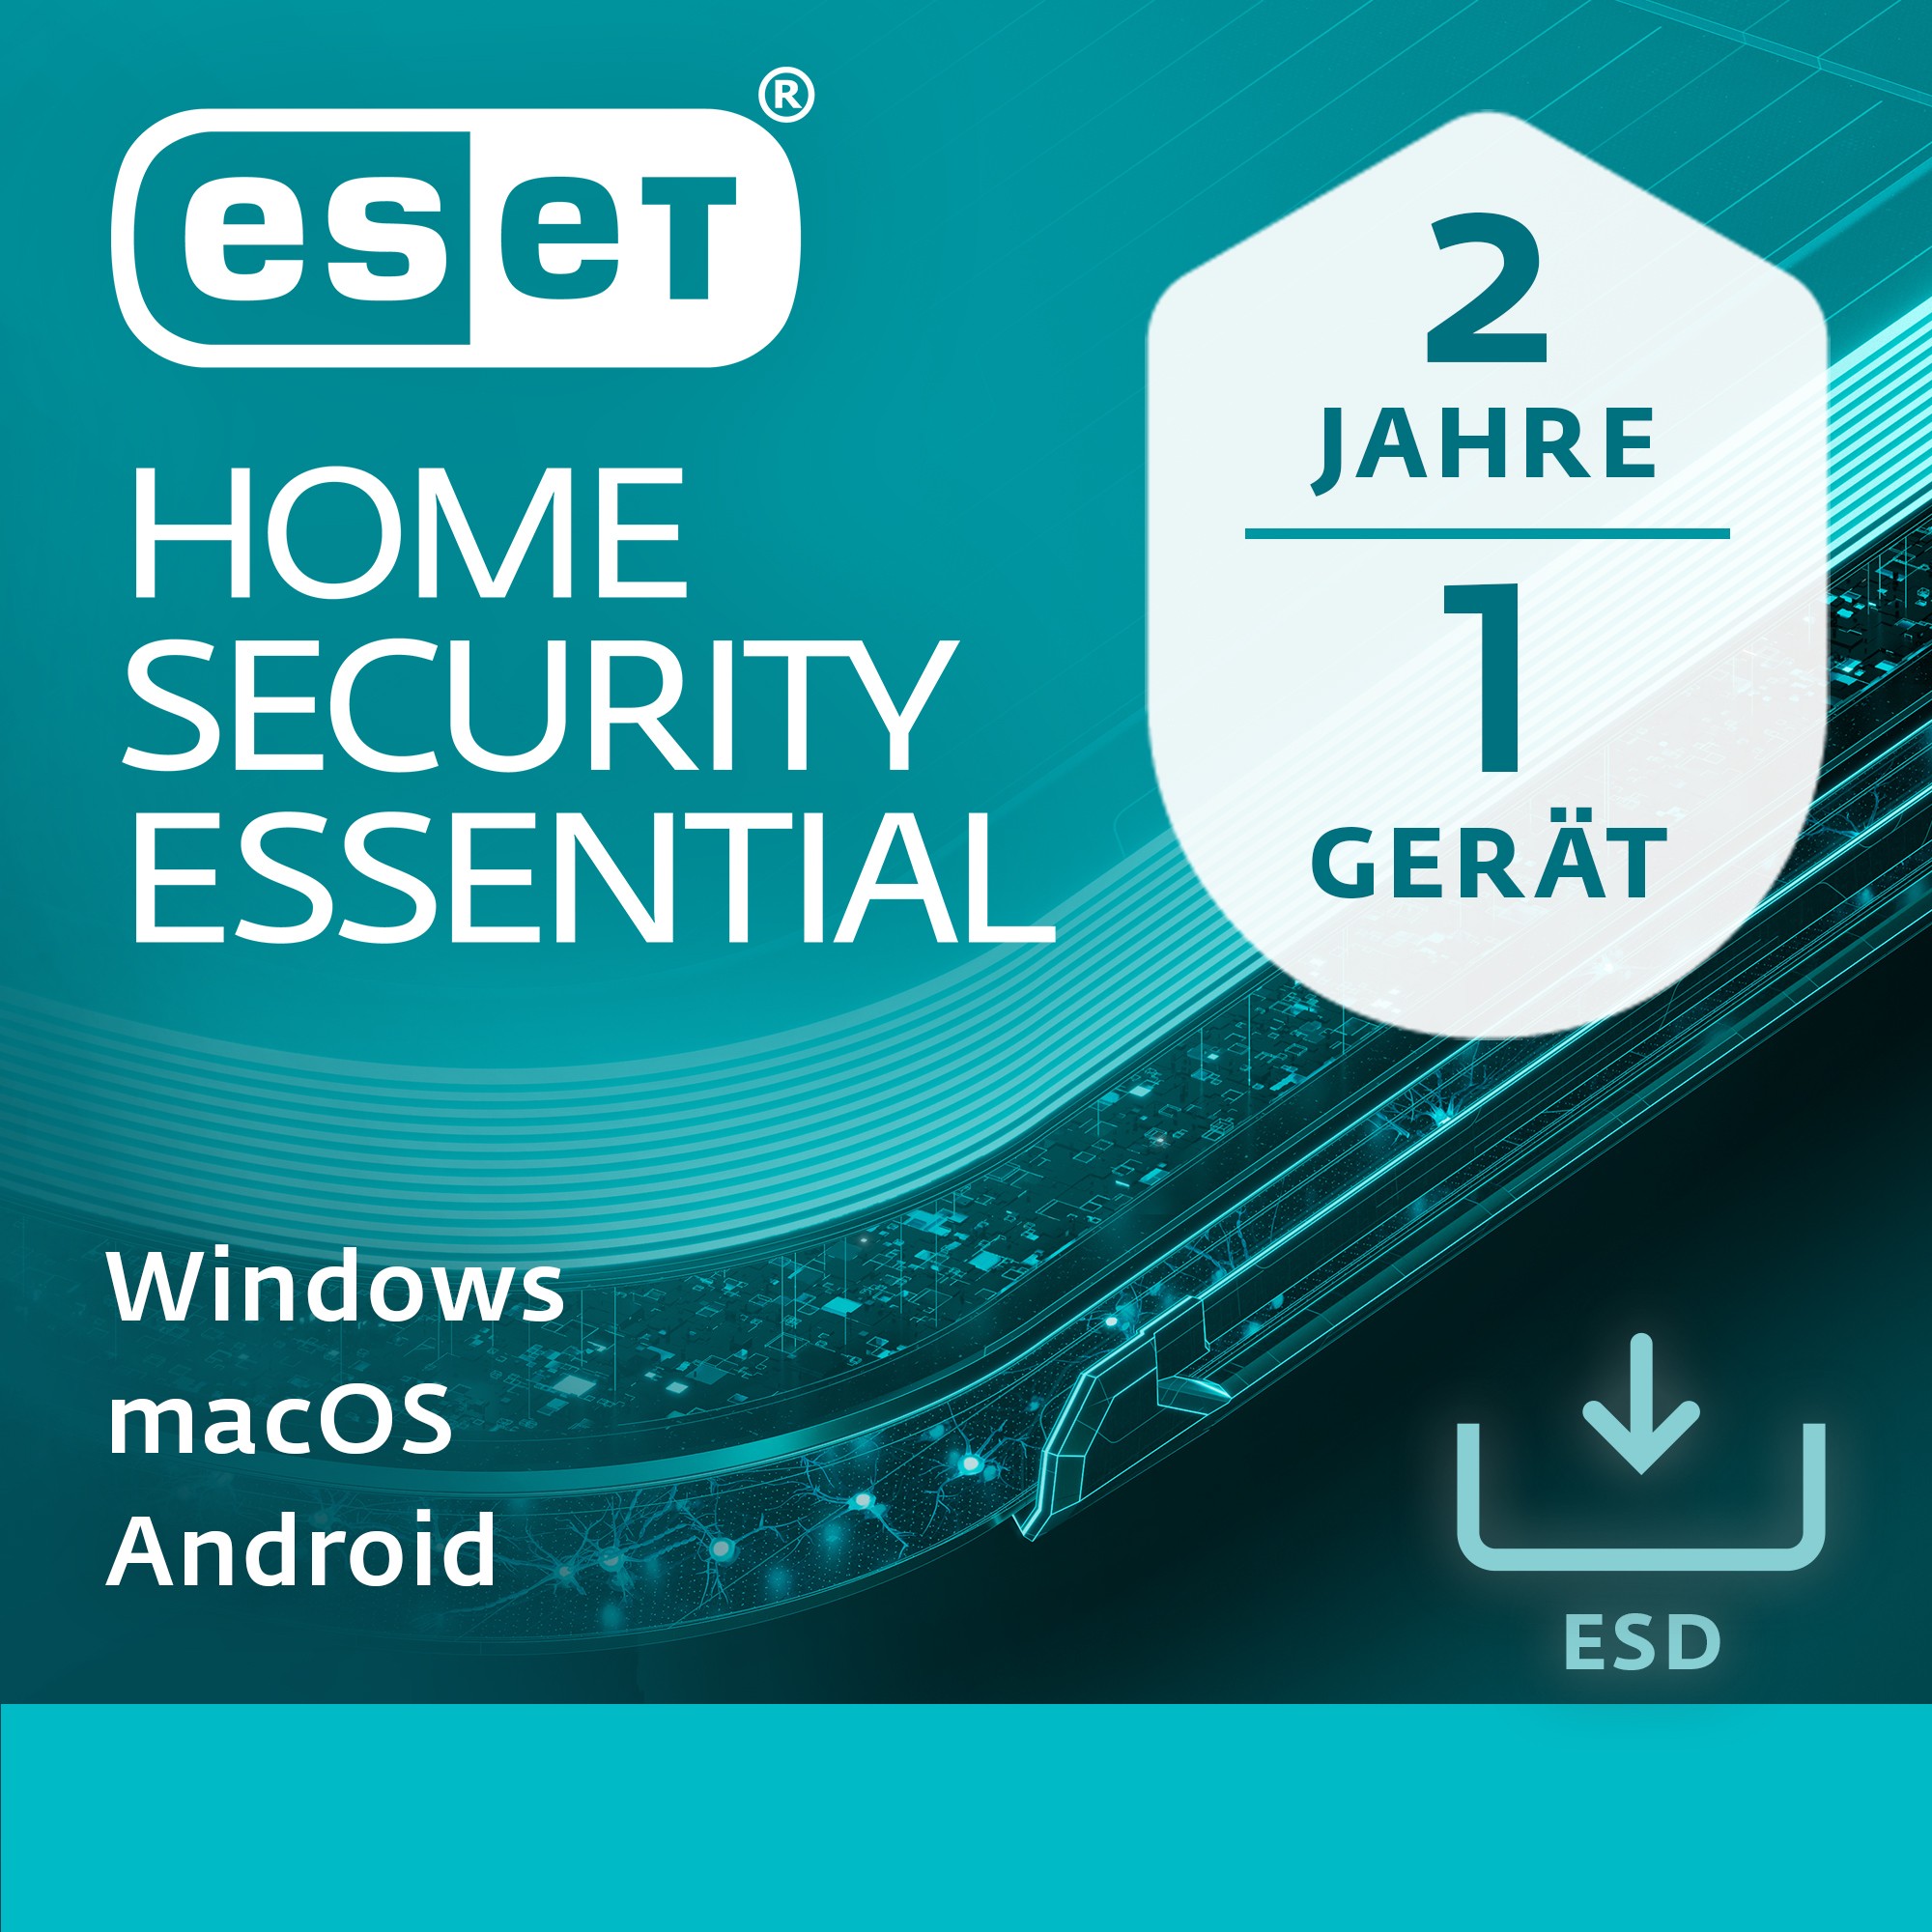 ESET Home Security Essential - 1 User. 2 Years - ESD-DownloadESD - EHSE-N2A1-VAKT-E